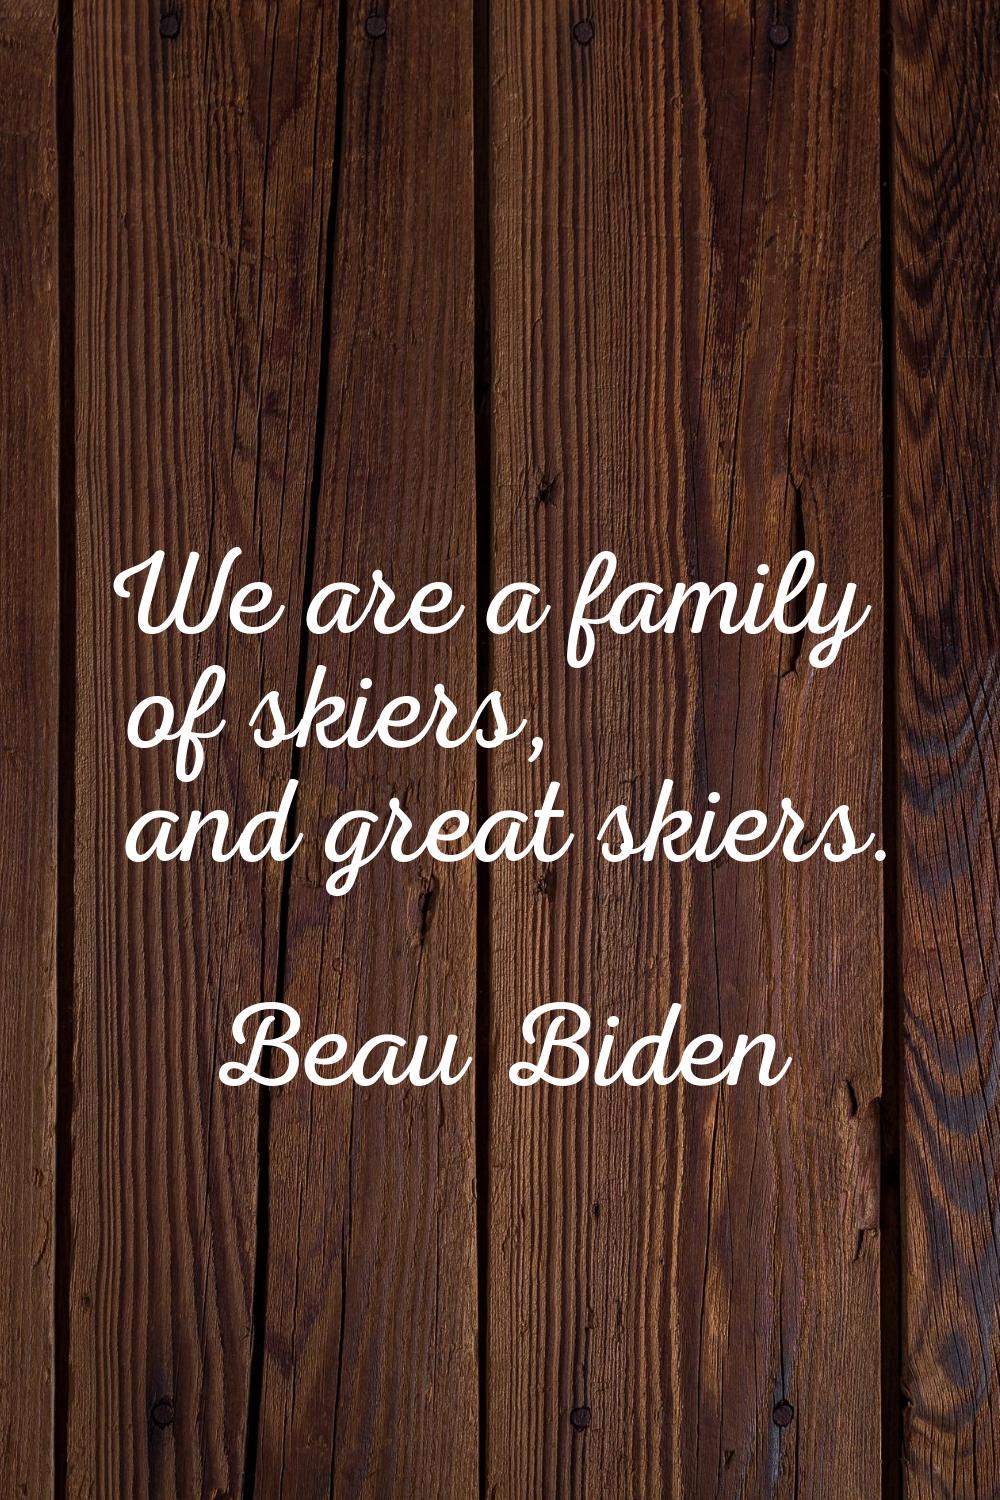 We are a family of skiers, and great skiers.